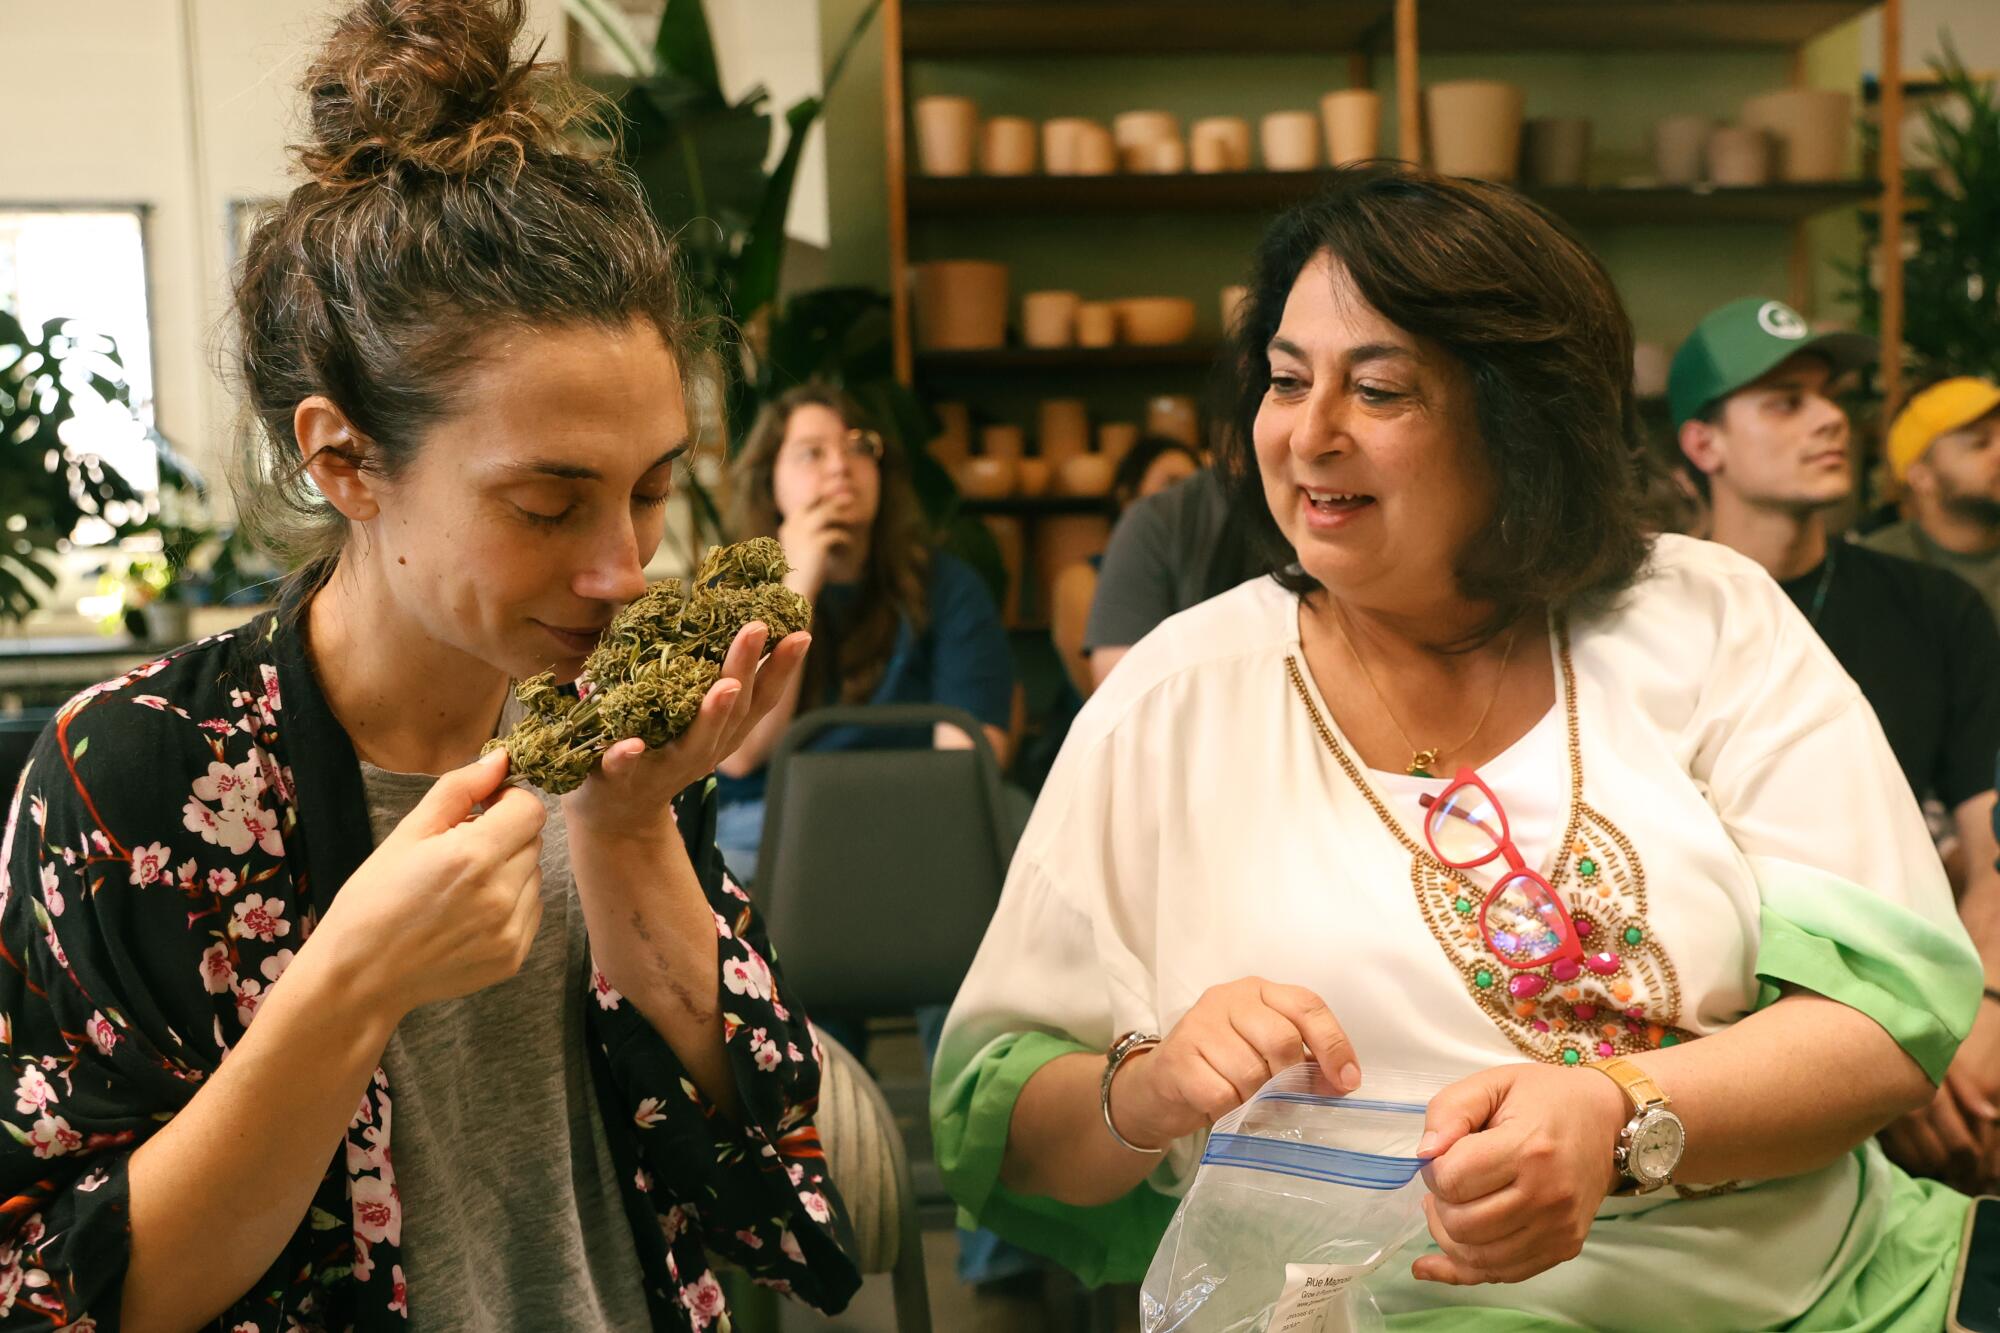 One woman sniffs a large bud of cannabis while another looks on.